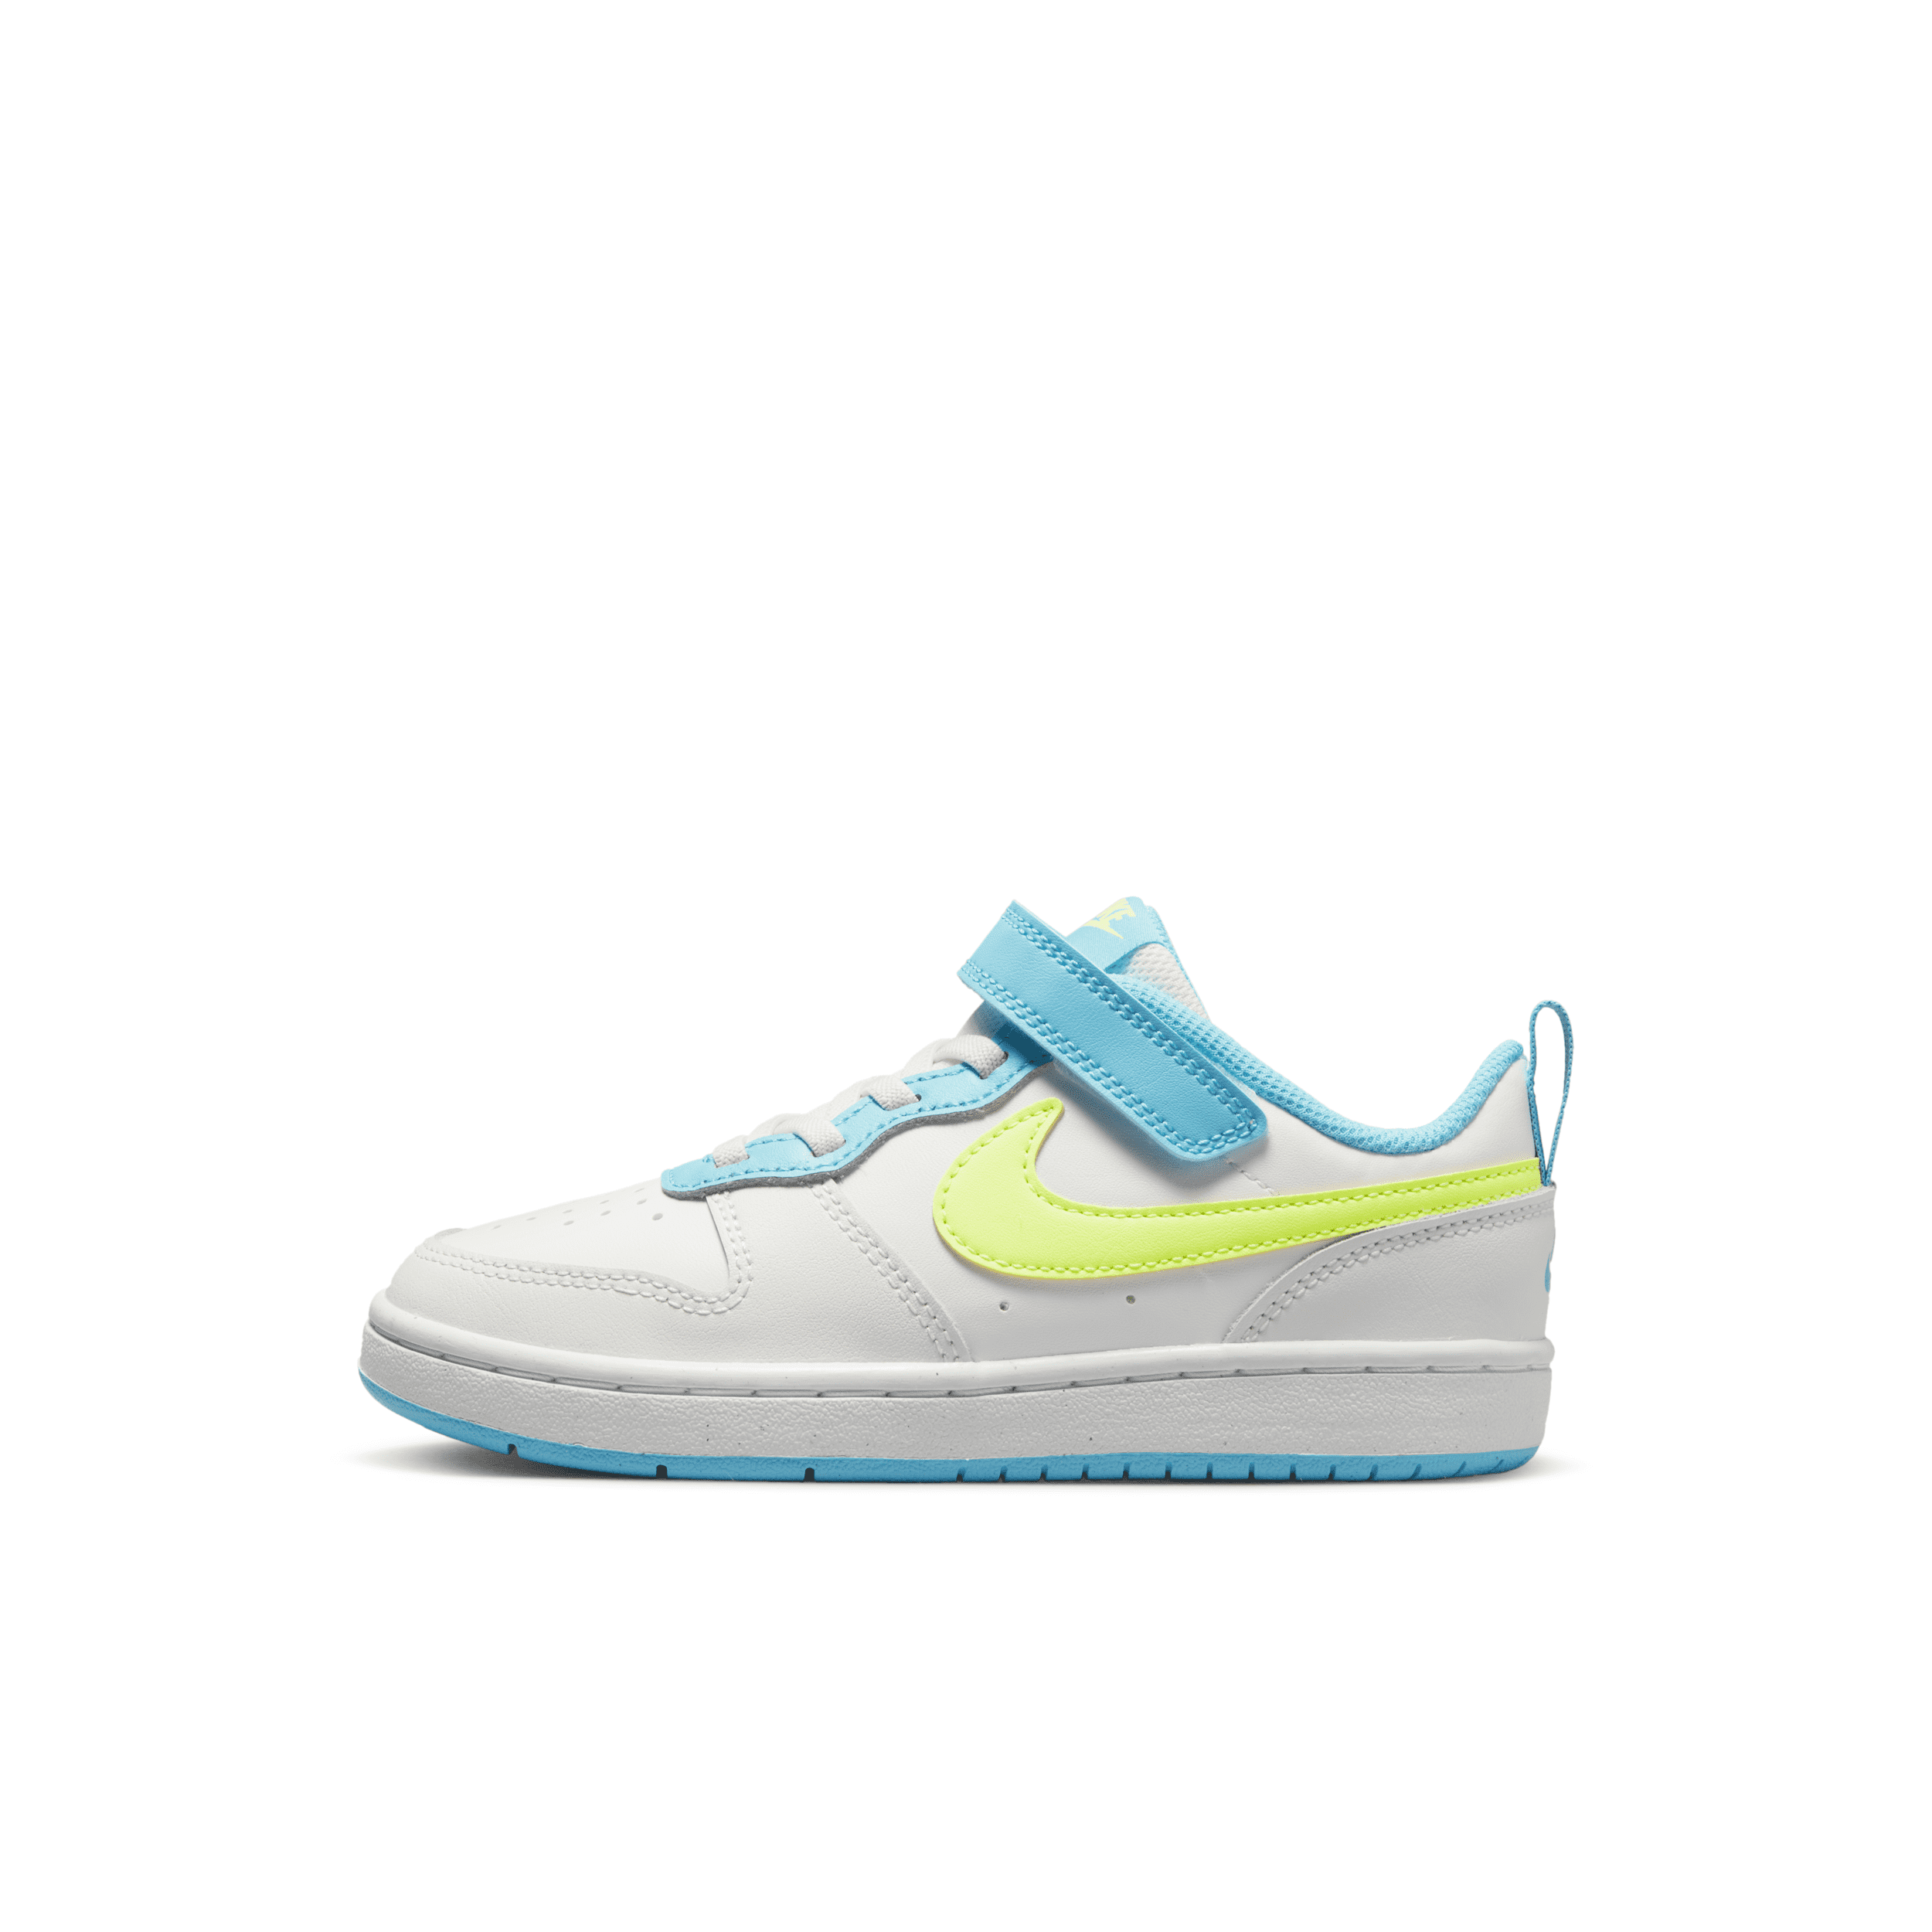 Nike Court Borough Low 2 Little Kids' Shoes In White